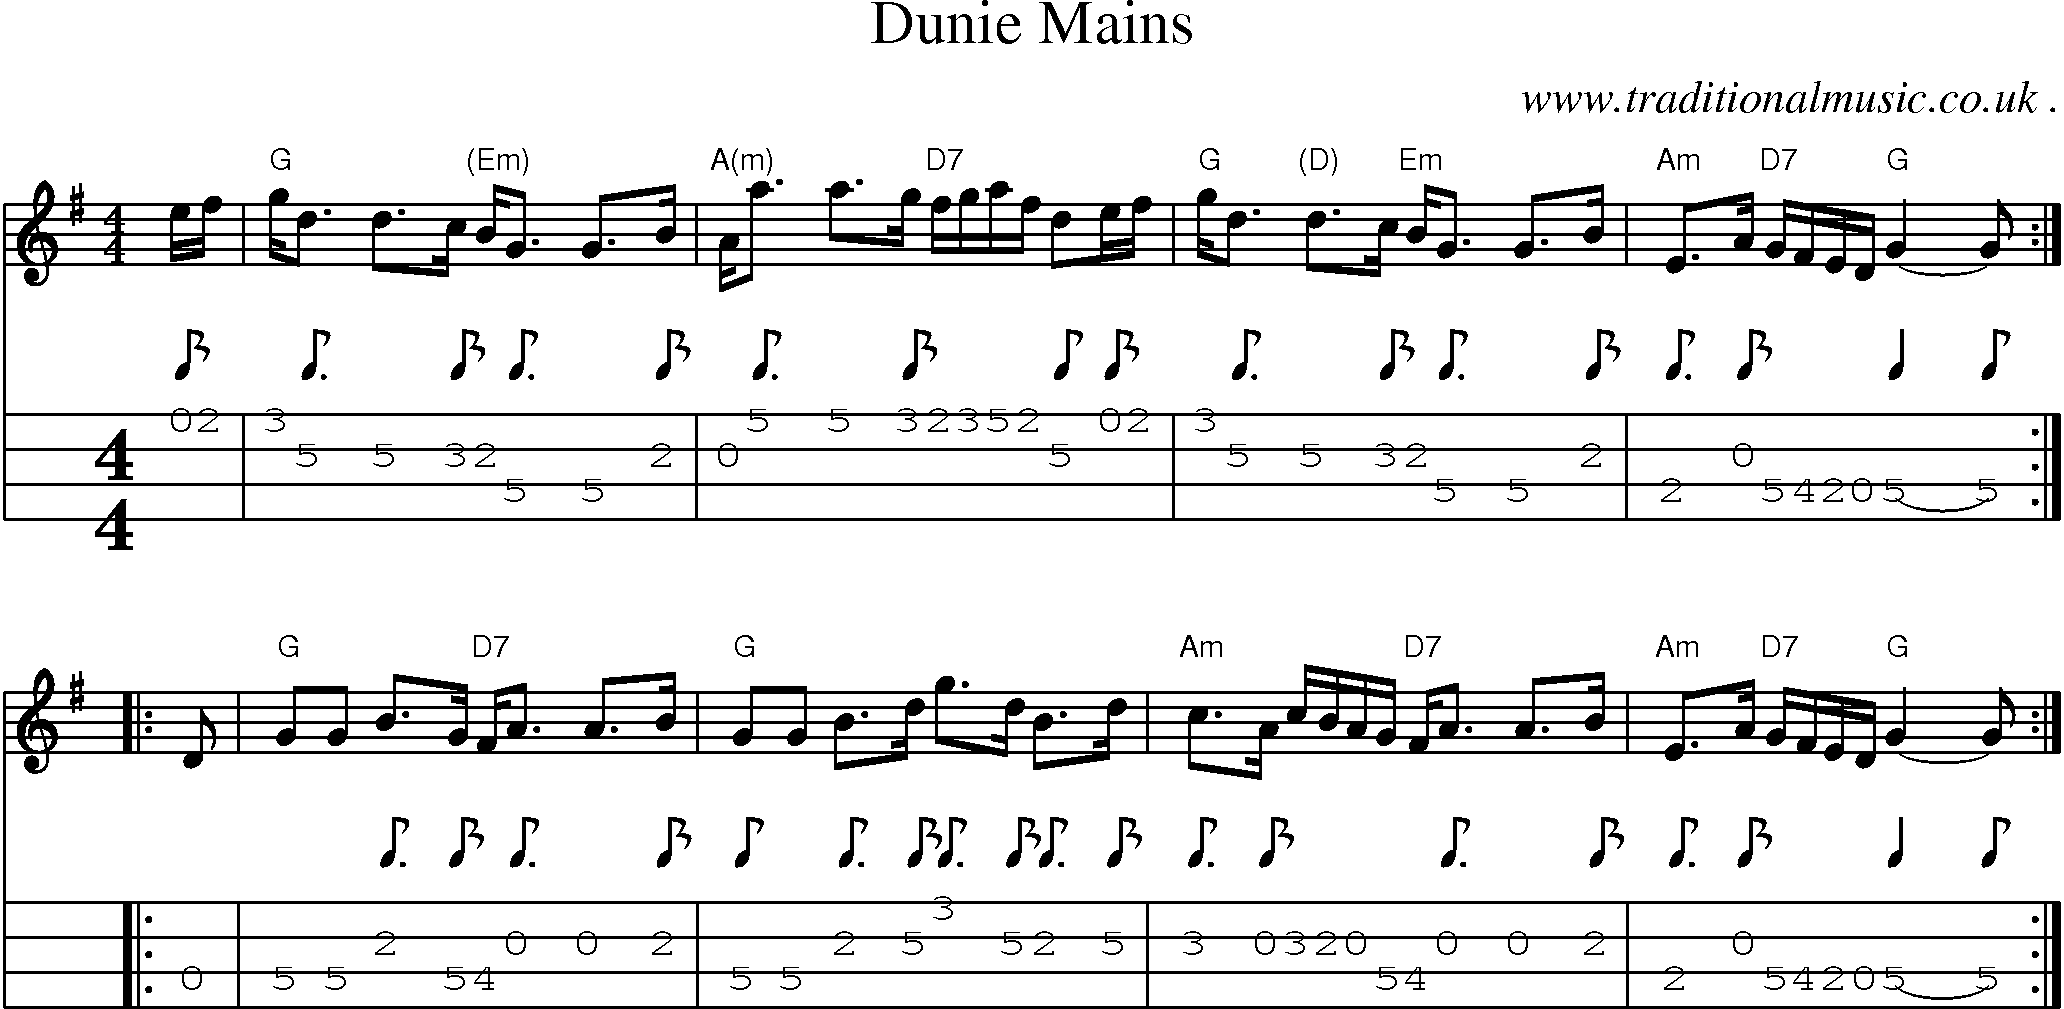 Sheet-music  score, Chords and Mandolin Tabs for Dunie Mains